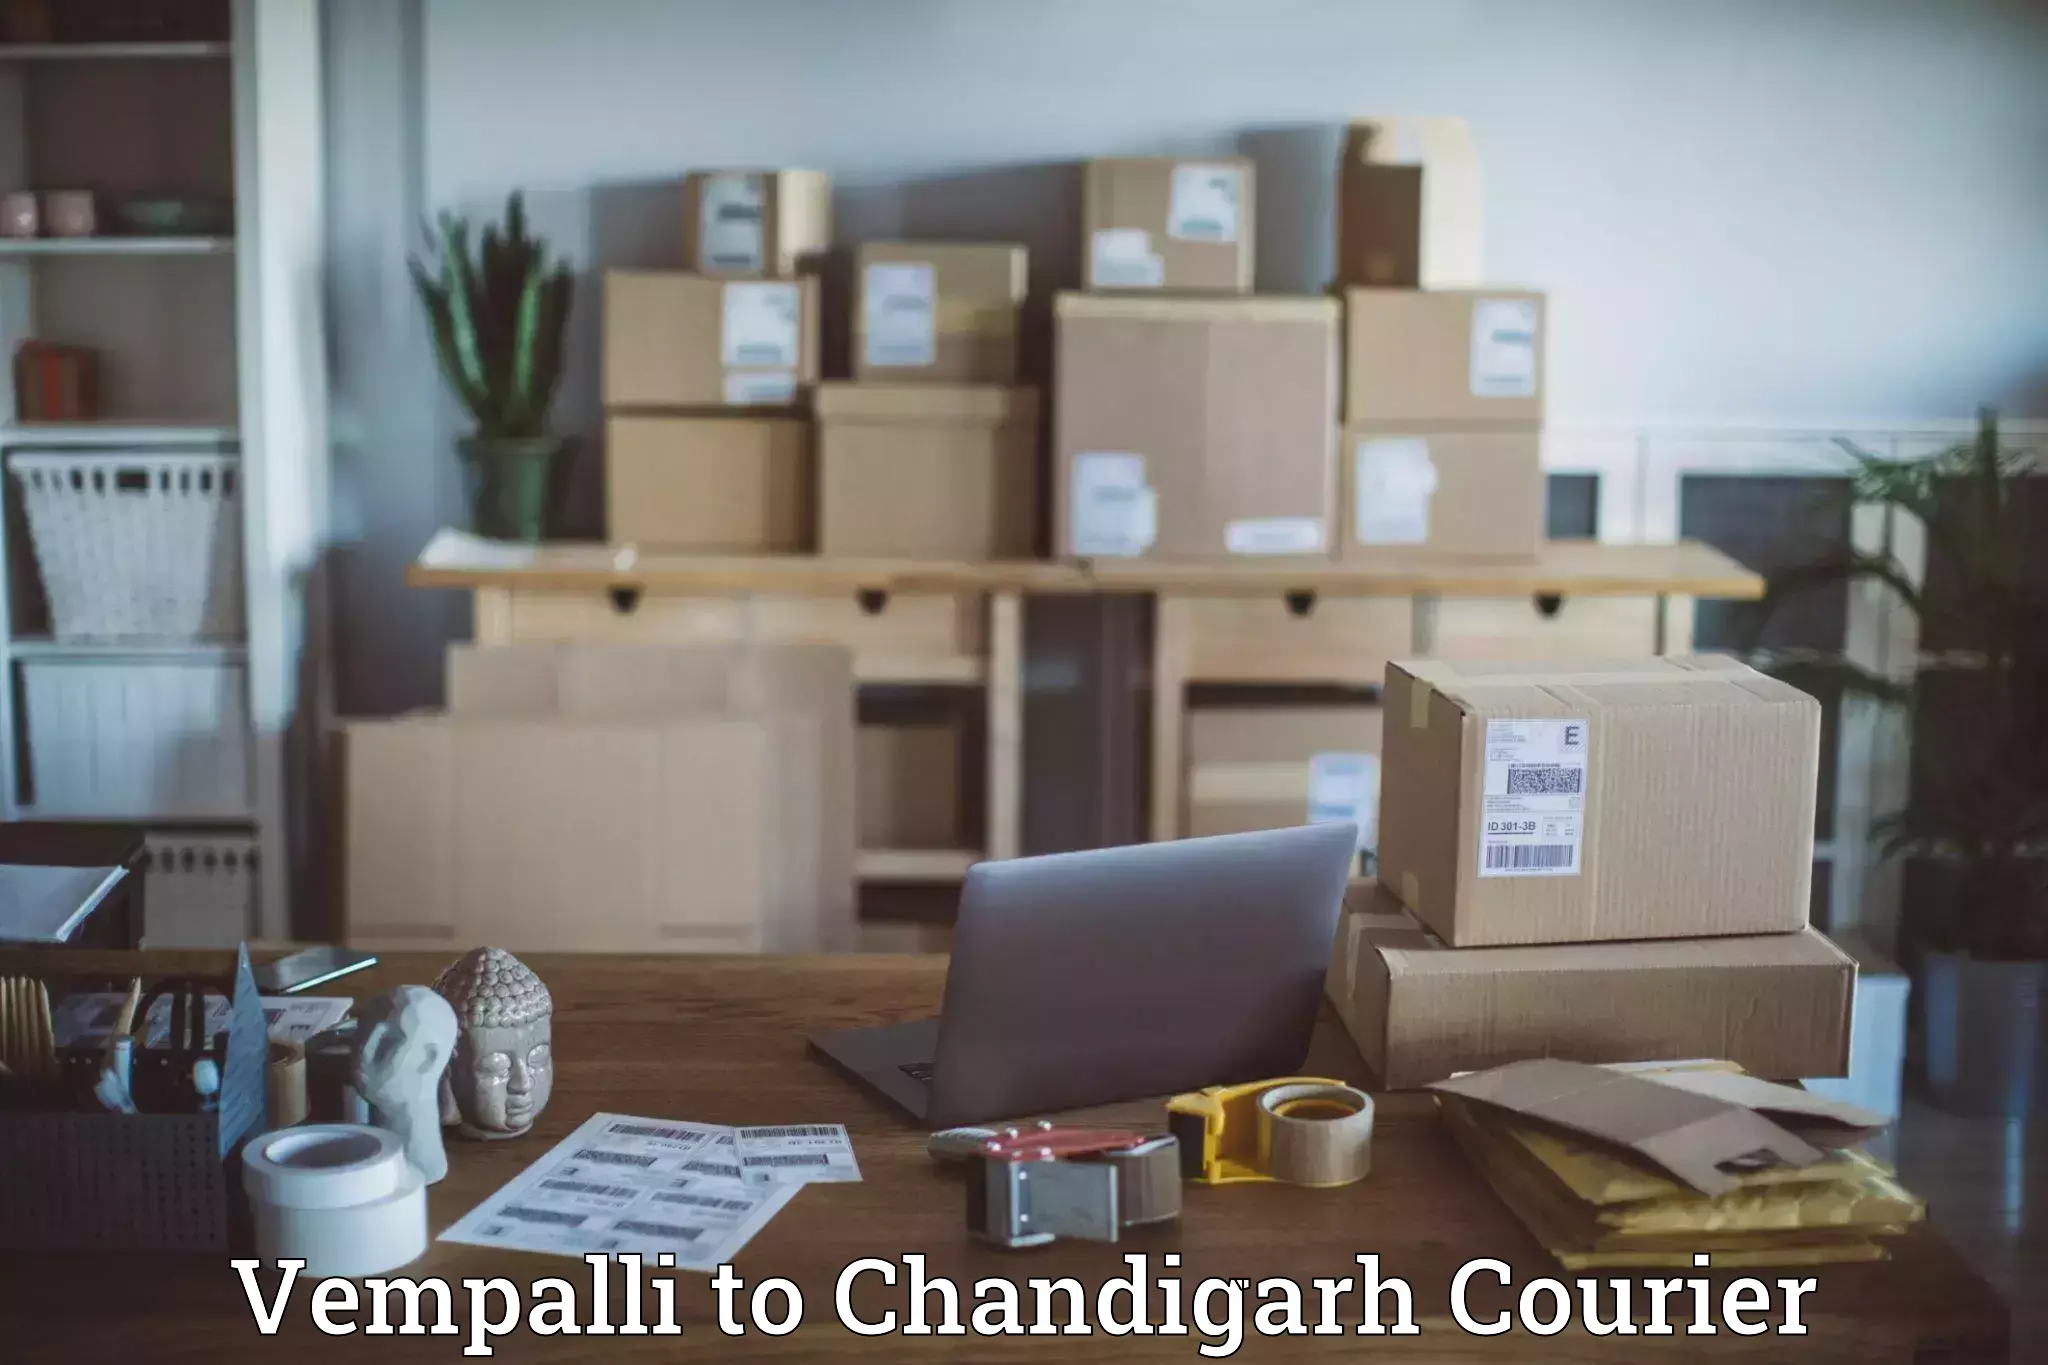 Parcel service for businesses Vempalli to Chandigarh